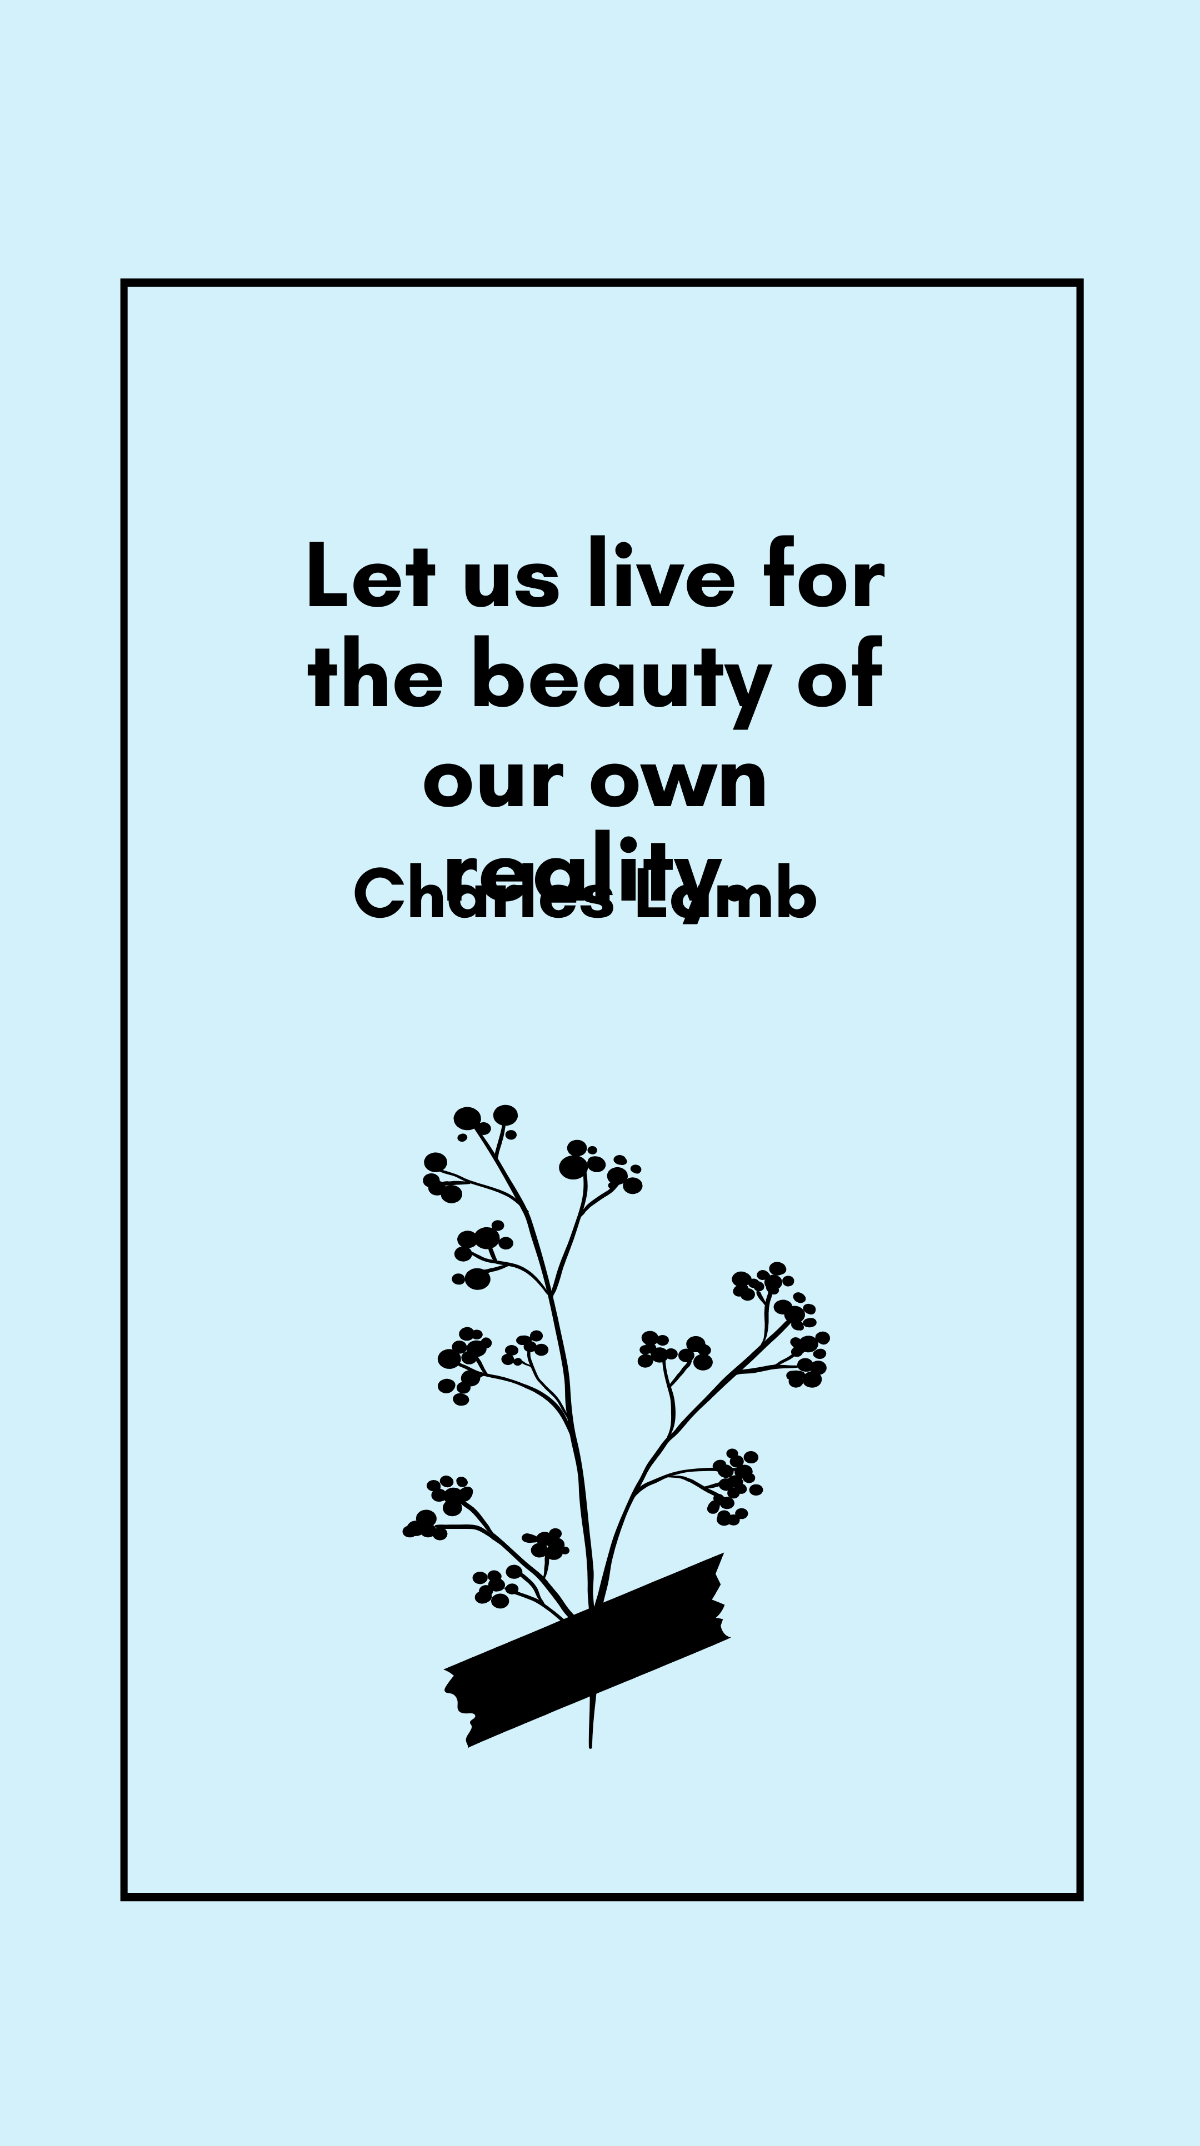 Charles Lamb - Let us live for the beauty of our own reality. Template